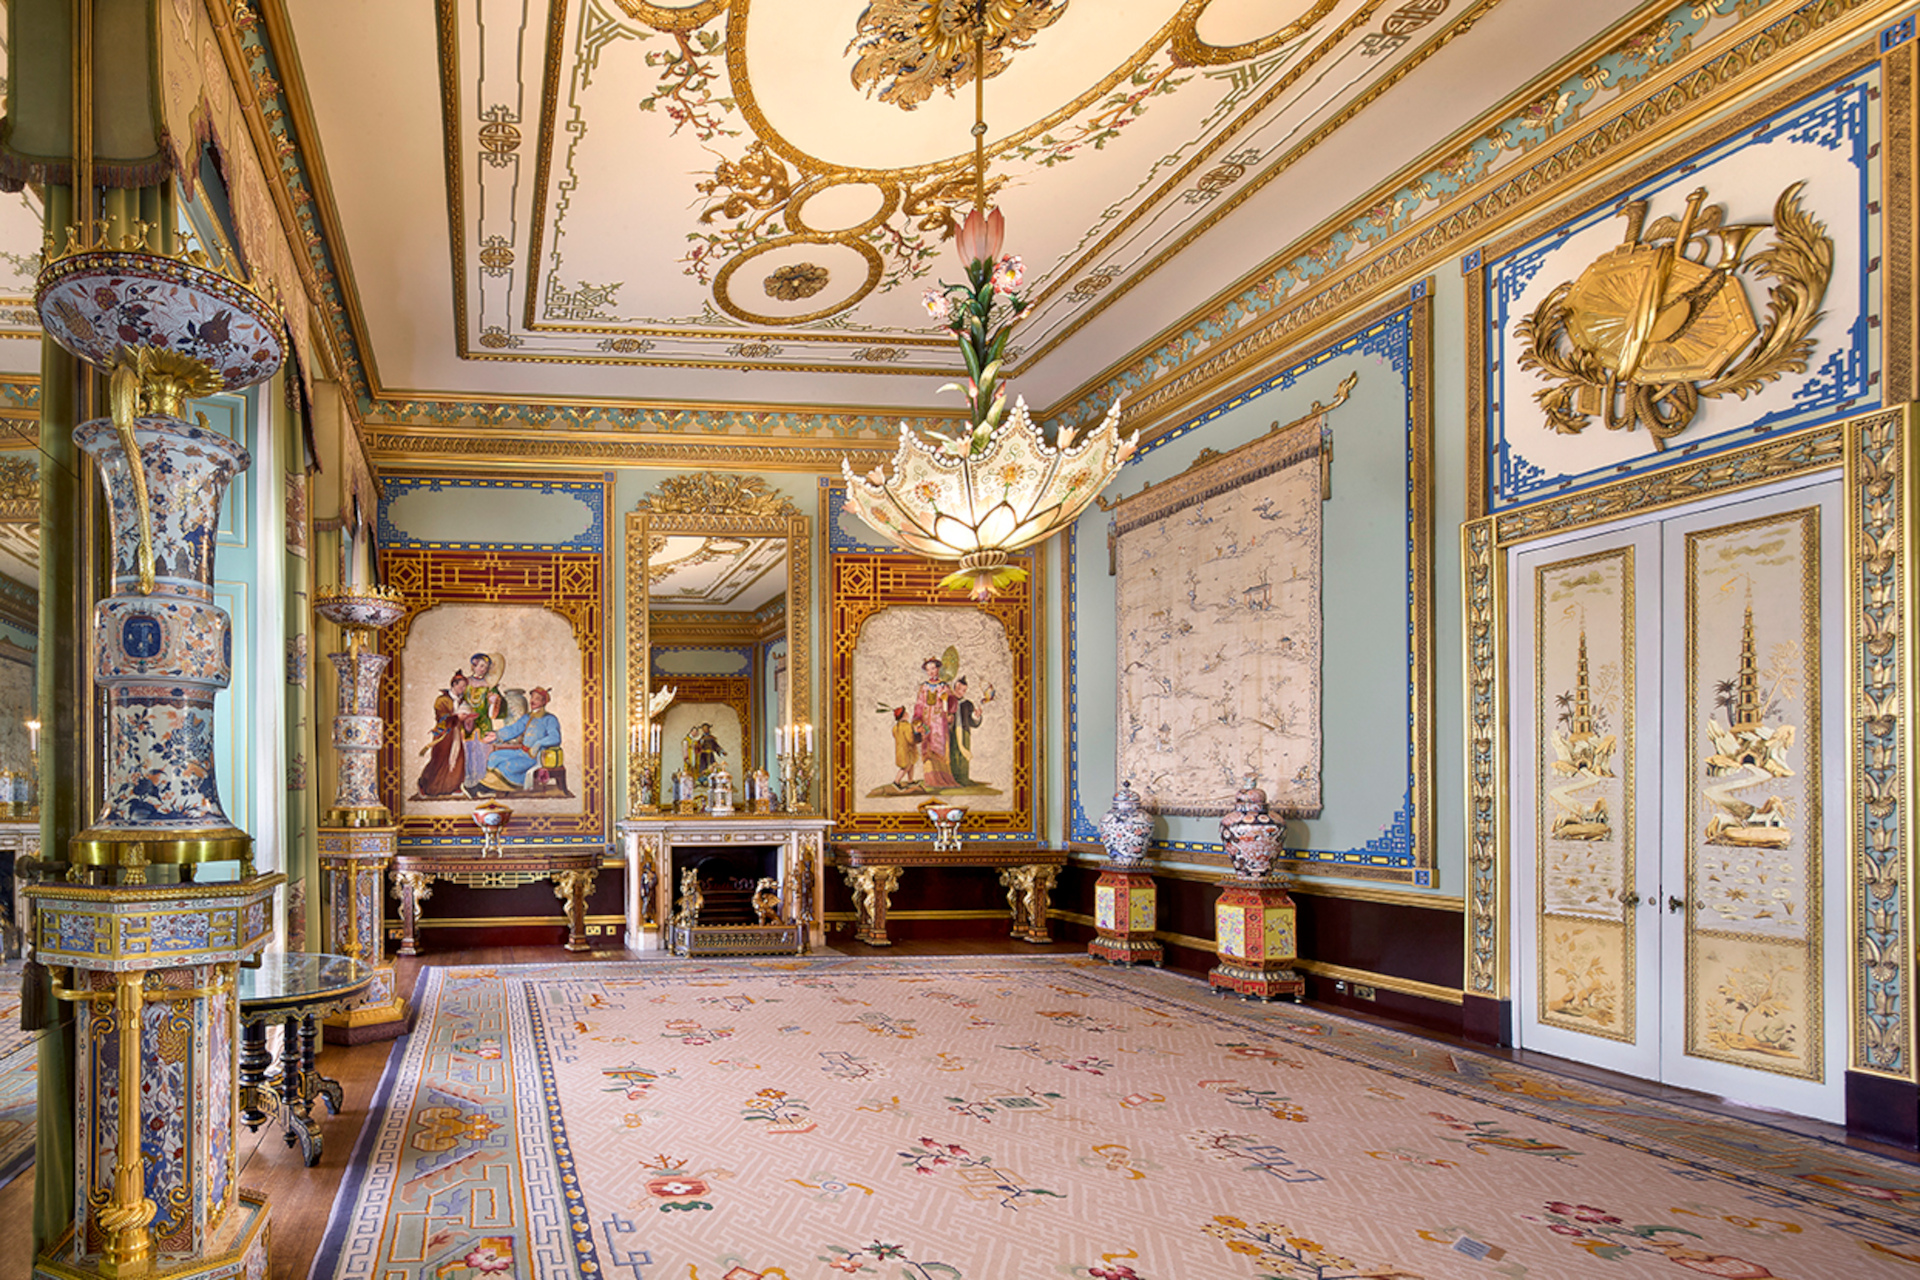 Ornately decorated room with gold ceilings and chandelier